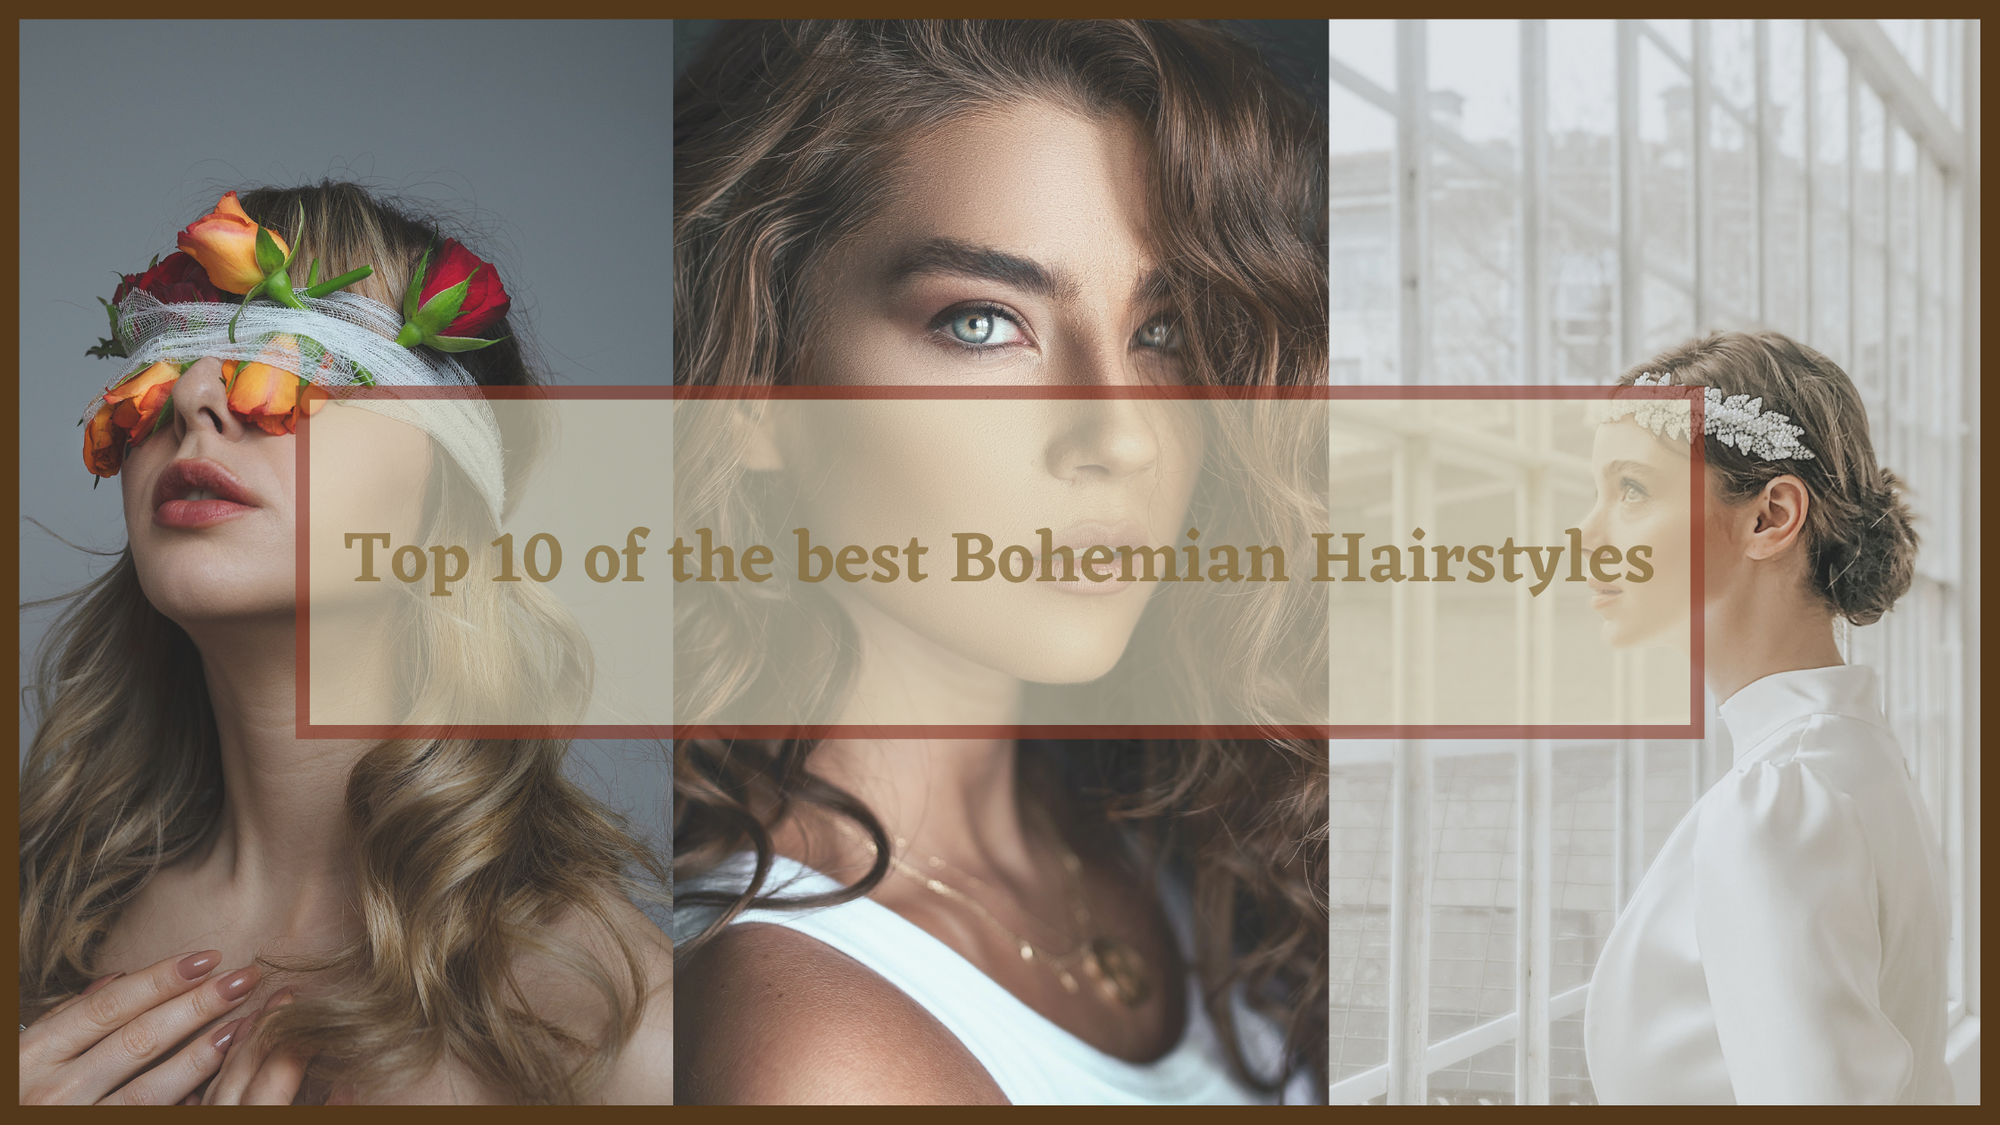 Top 10 of the best Bohemian Hairstyles